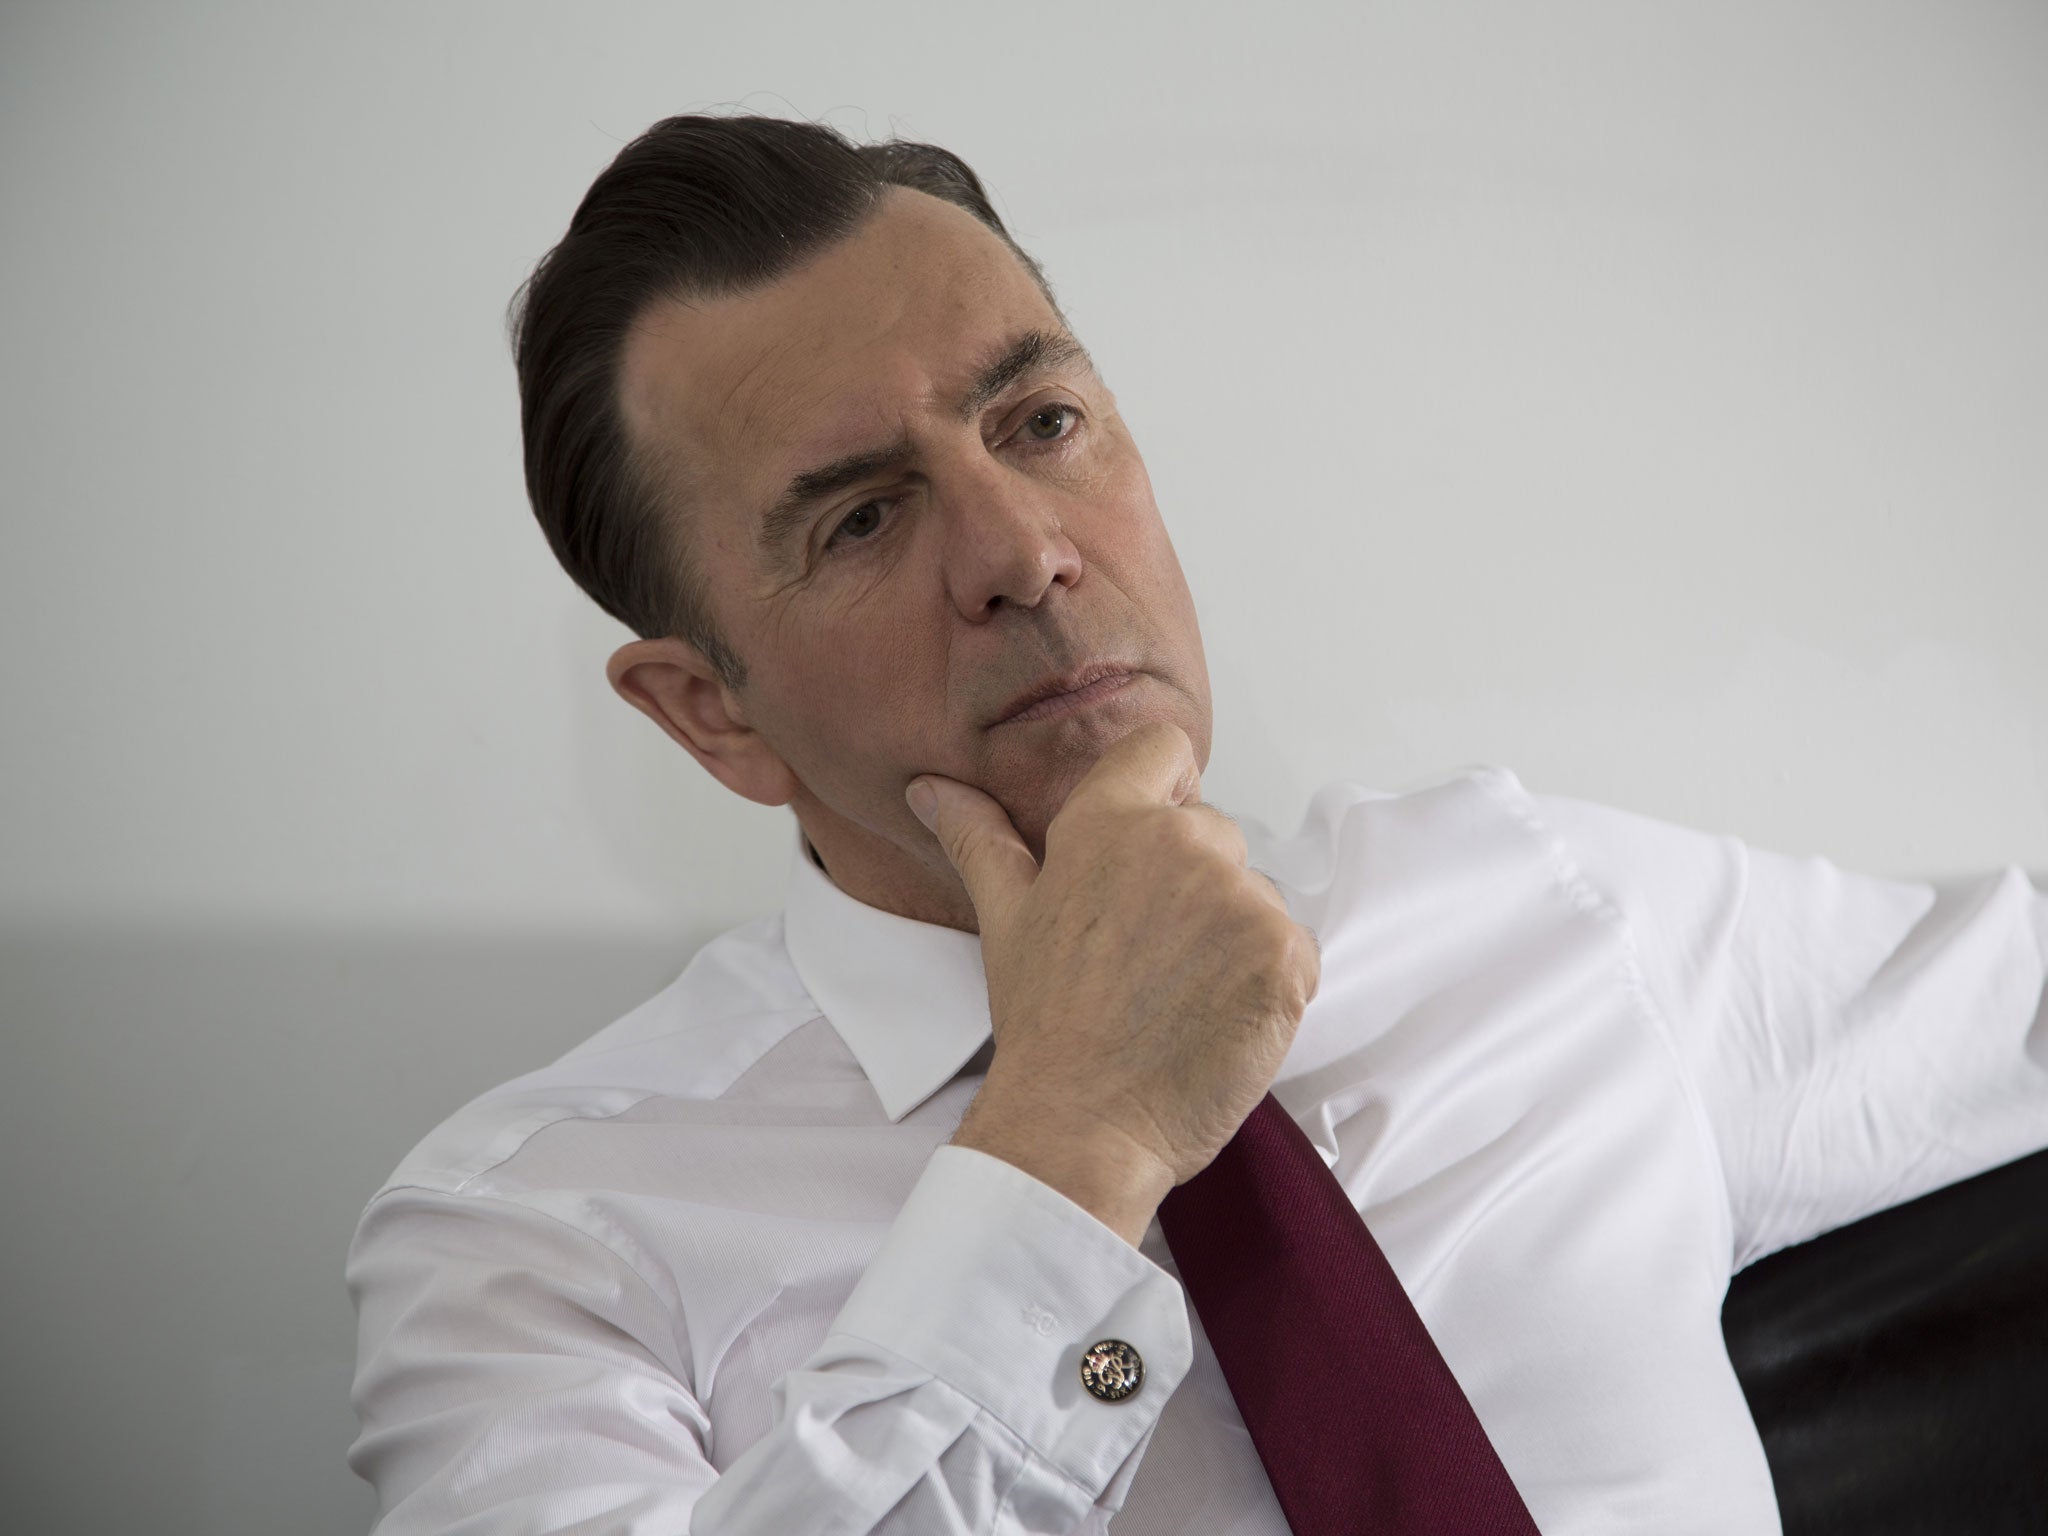 Duncan Bannatyne left school at 15 and was still penniless at 29